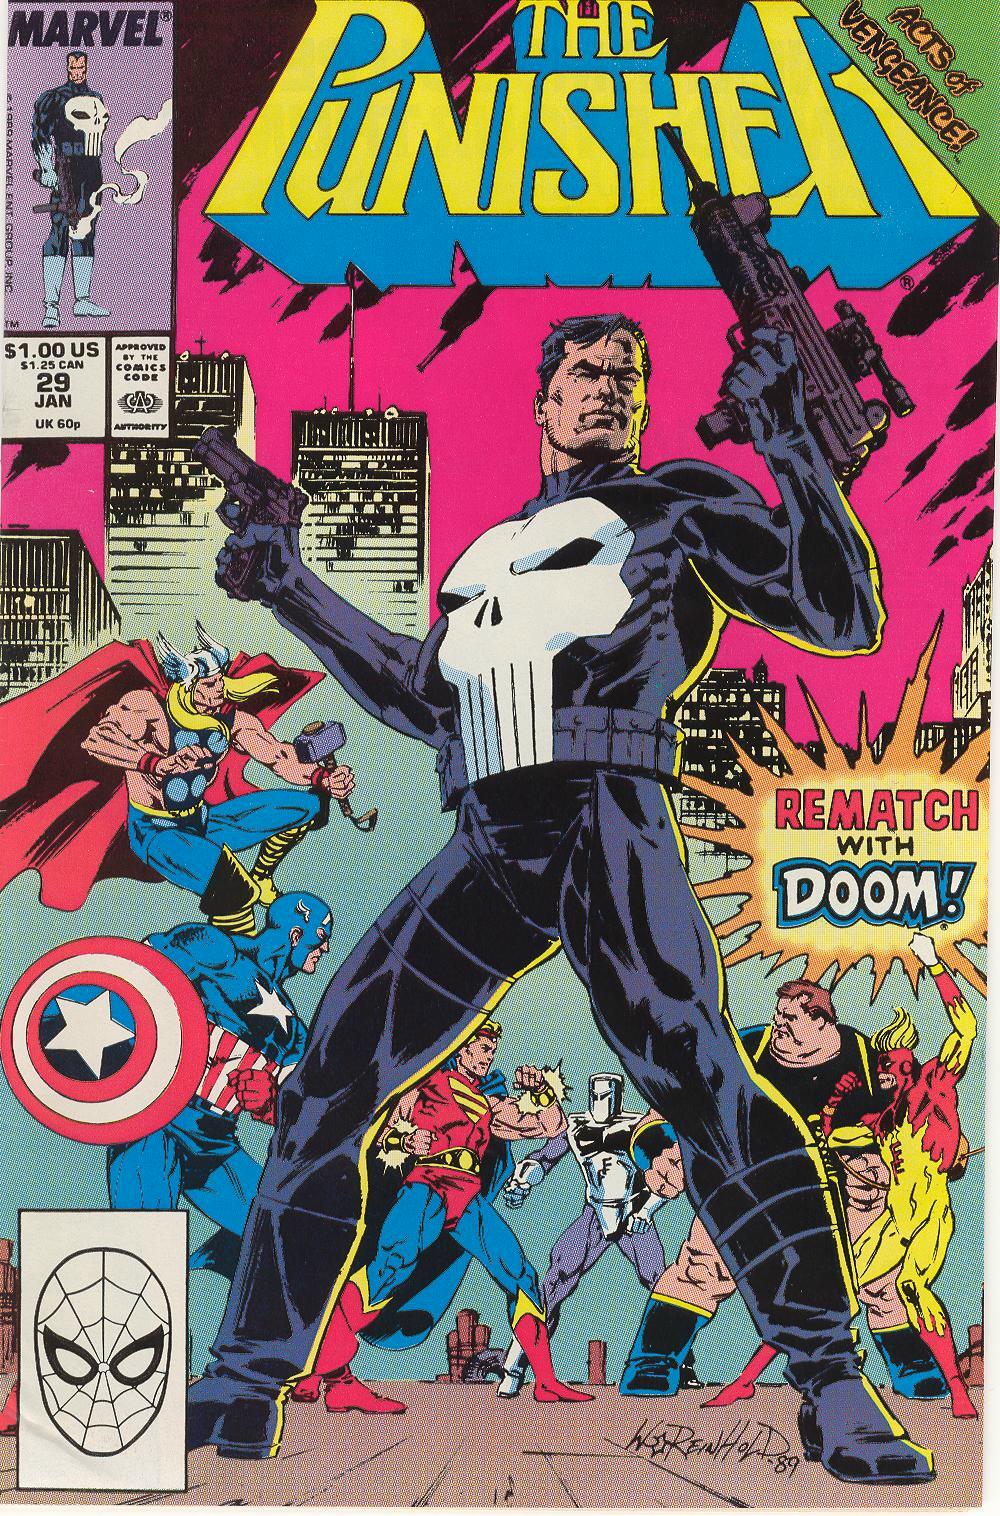 Read online The Punisher (1987) comic -  Issue #29 - AoV - Too many Dooms - 1